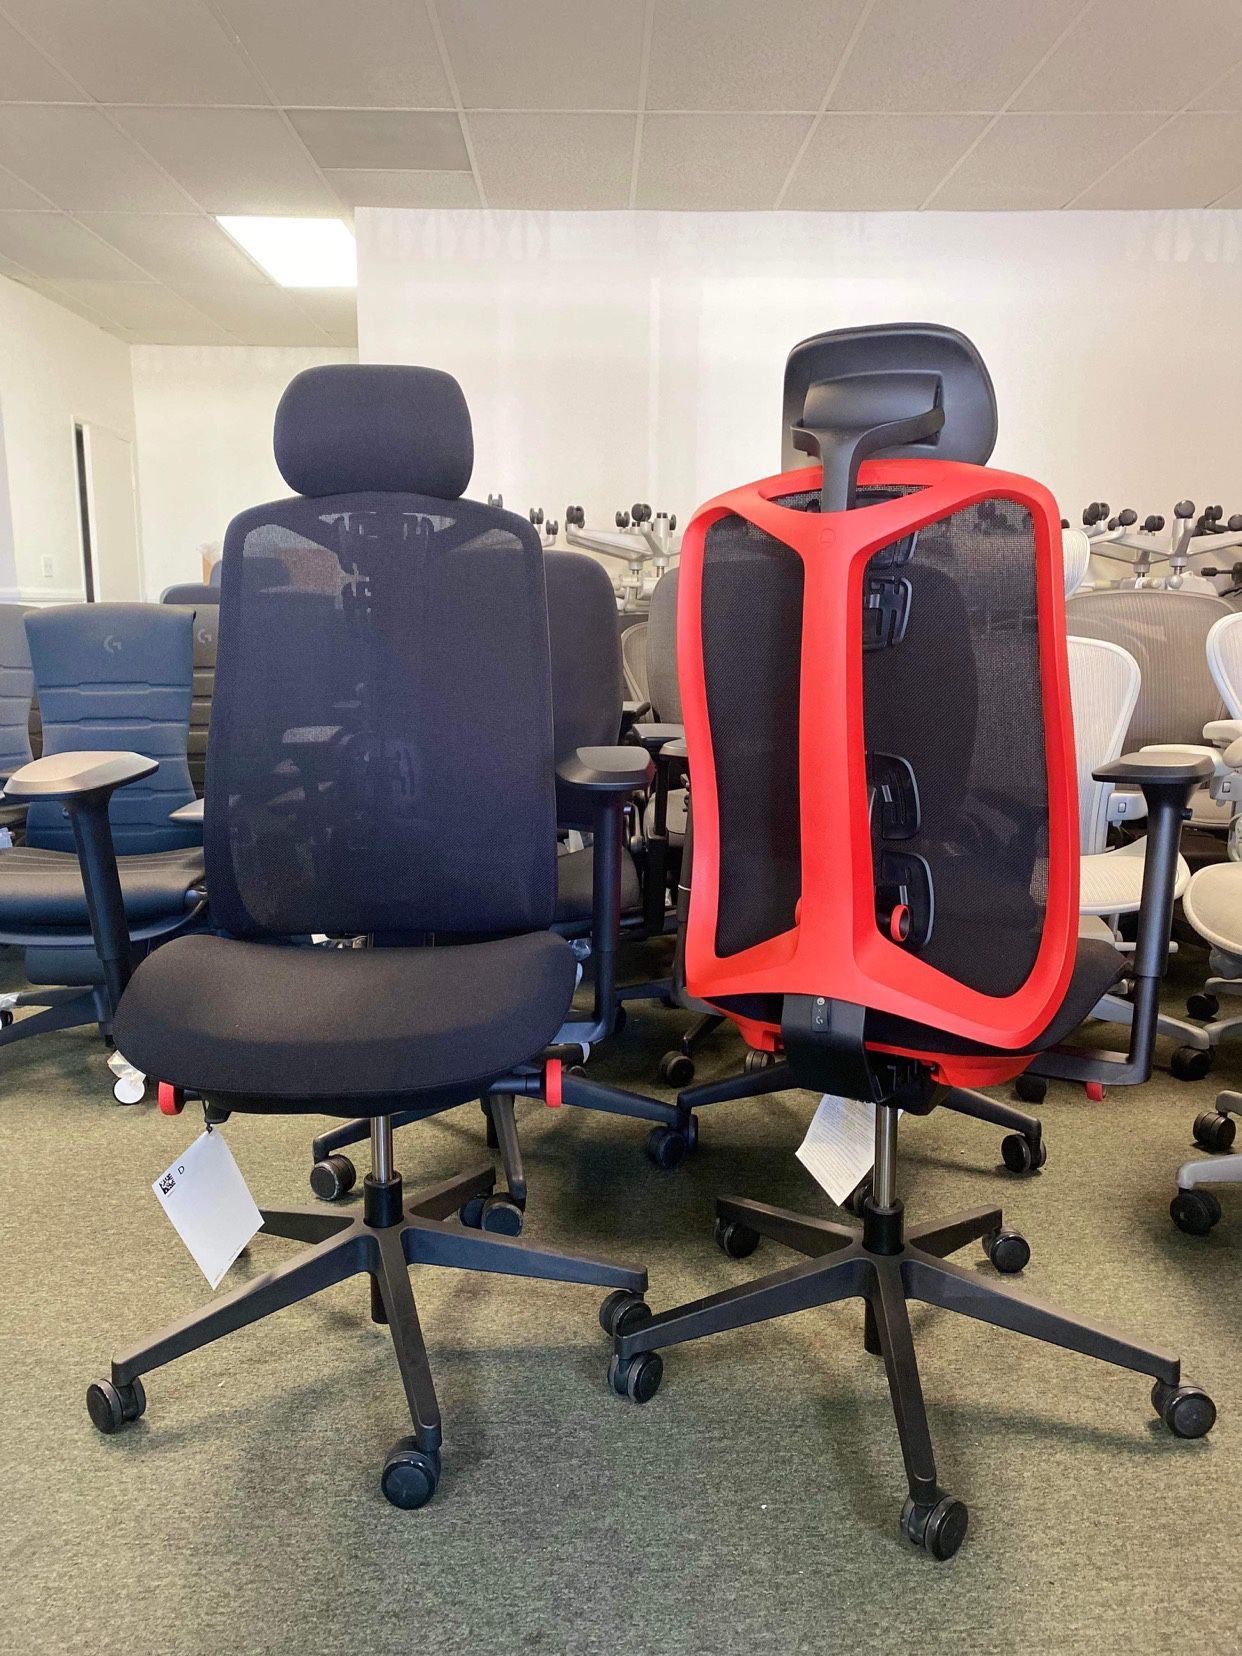 NEW HERMAN MILLER LOGITECH VANTUM GAMING CHAIR FULLY LOADED WITH HEADREST 🔥 GUARANTEE LOWEST COST 🔥 LARGE AMOUNTS.